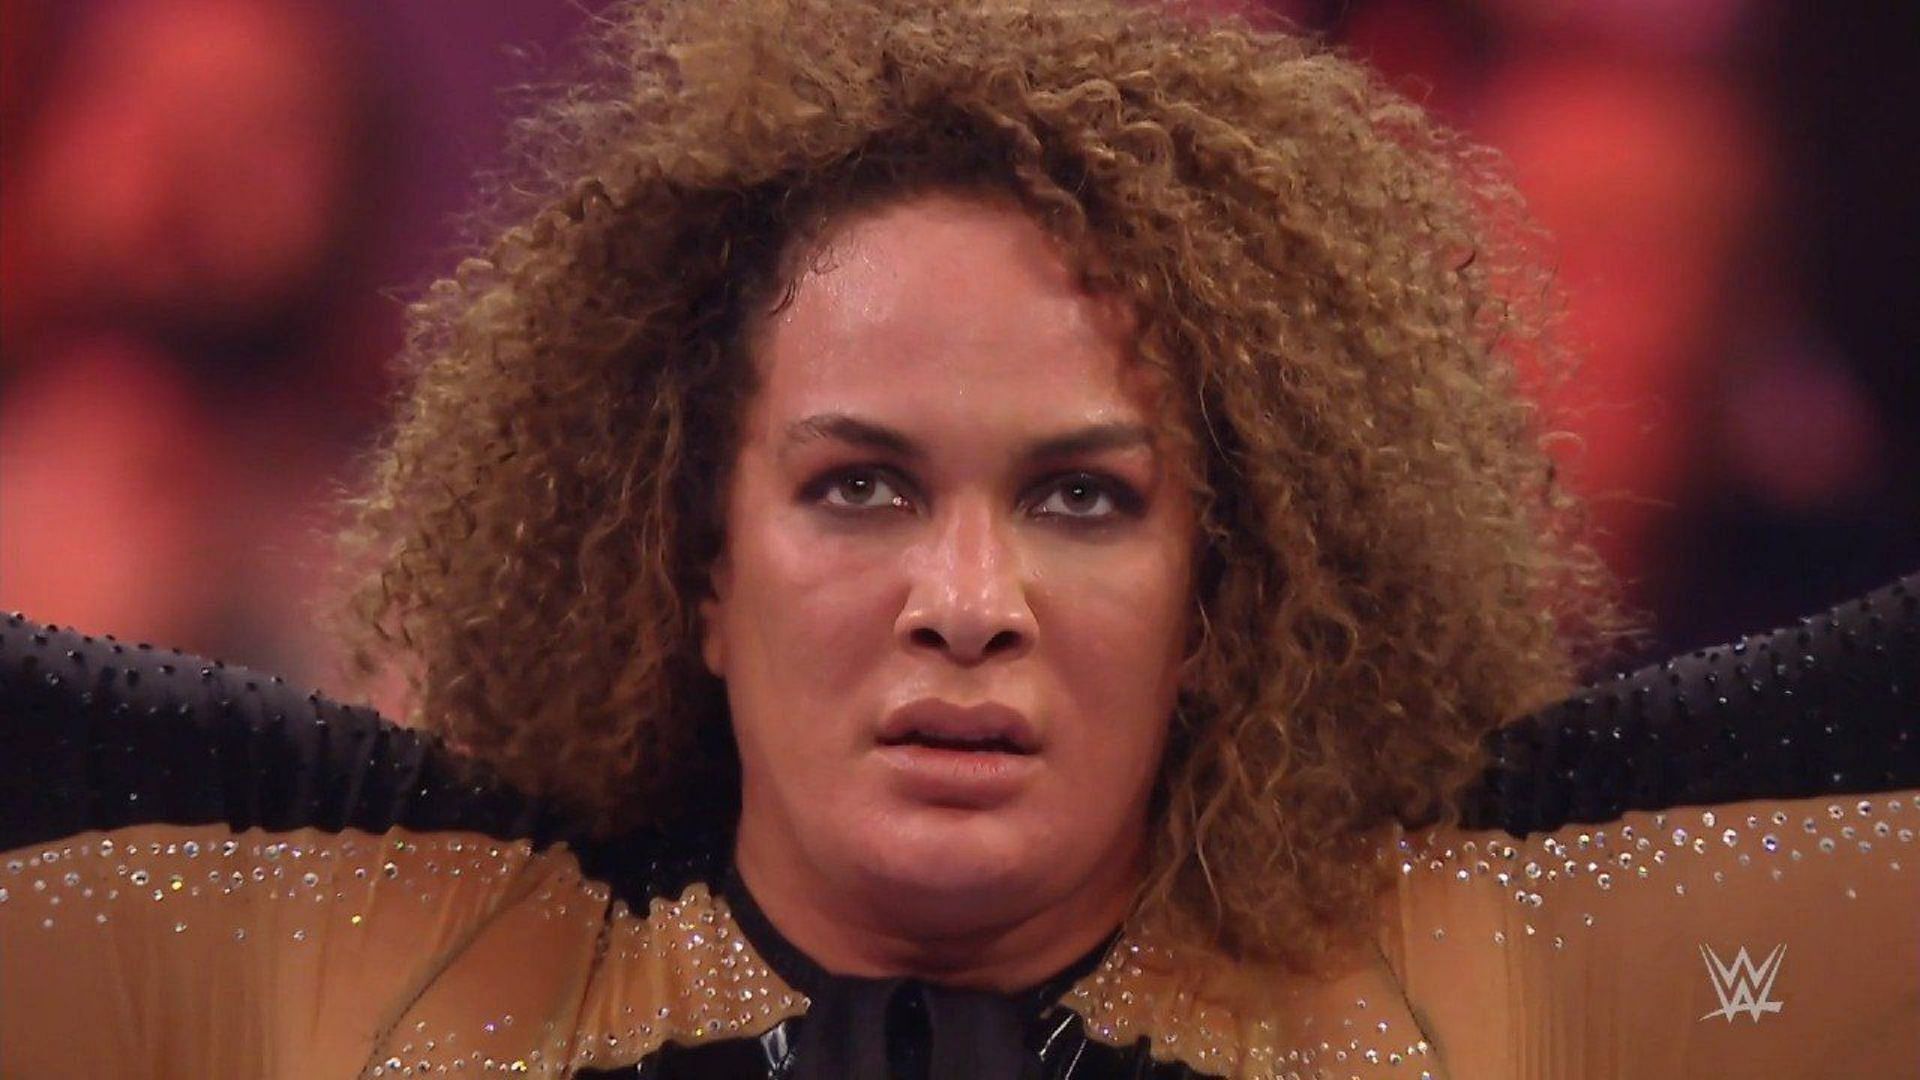 Nia Jax has opened up about her thunderous punch from last year